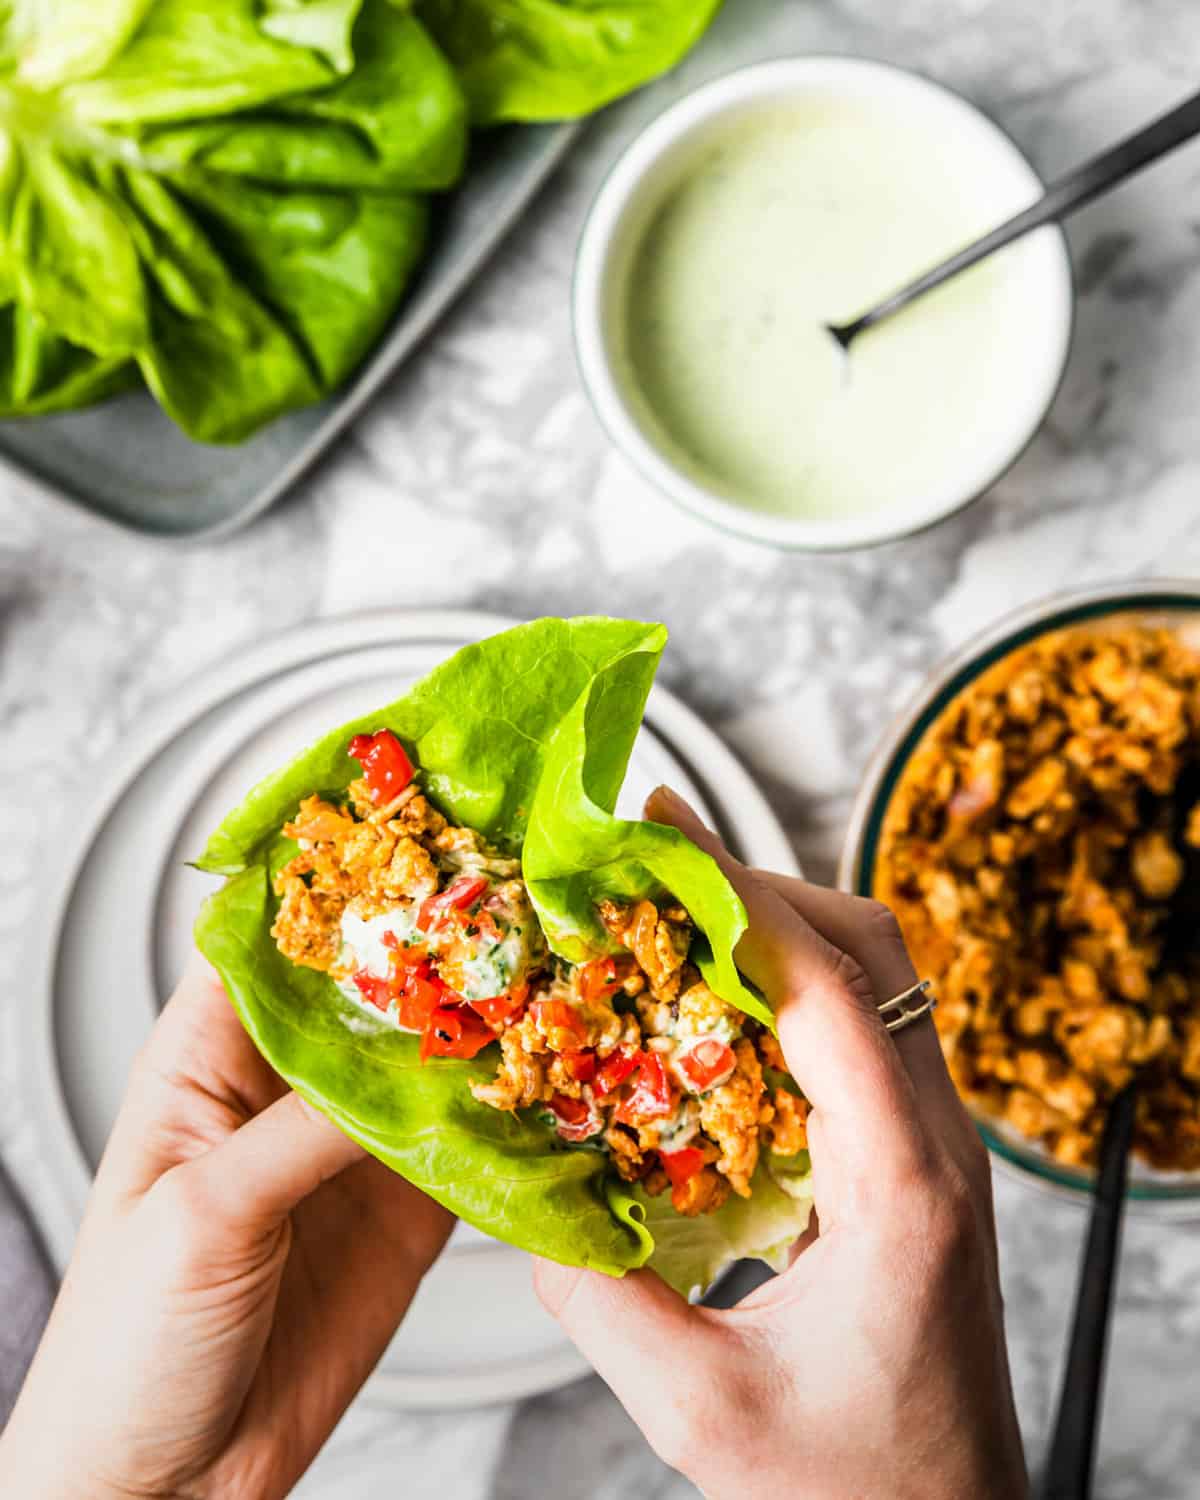 holding a lettuce wrap with ground mexican chicken with crema on top.